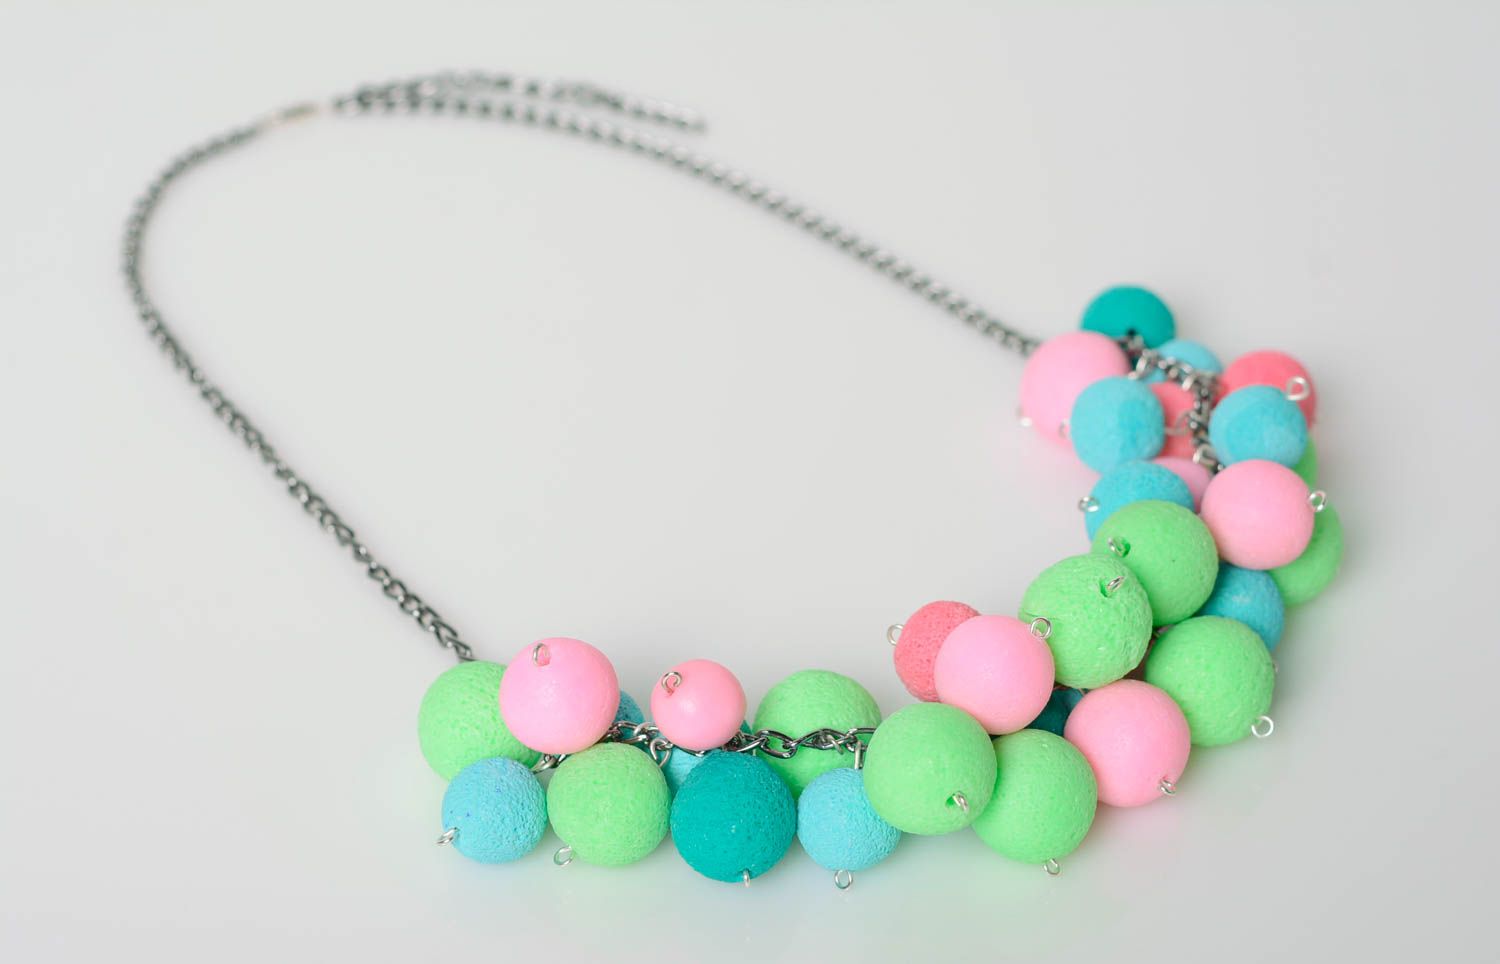 Handmade women's necklace with colorful polymer clay beads on metal chain photo 1